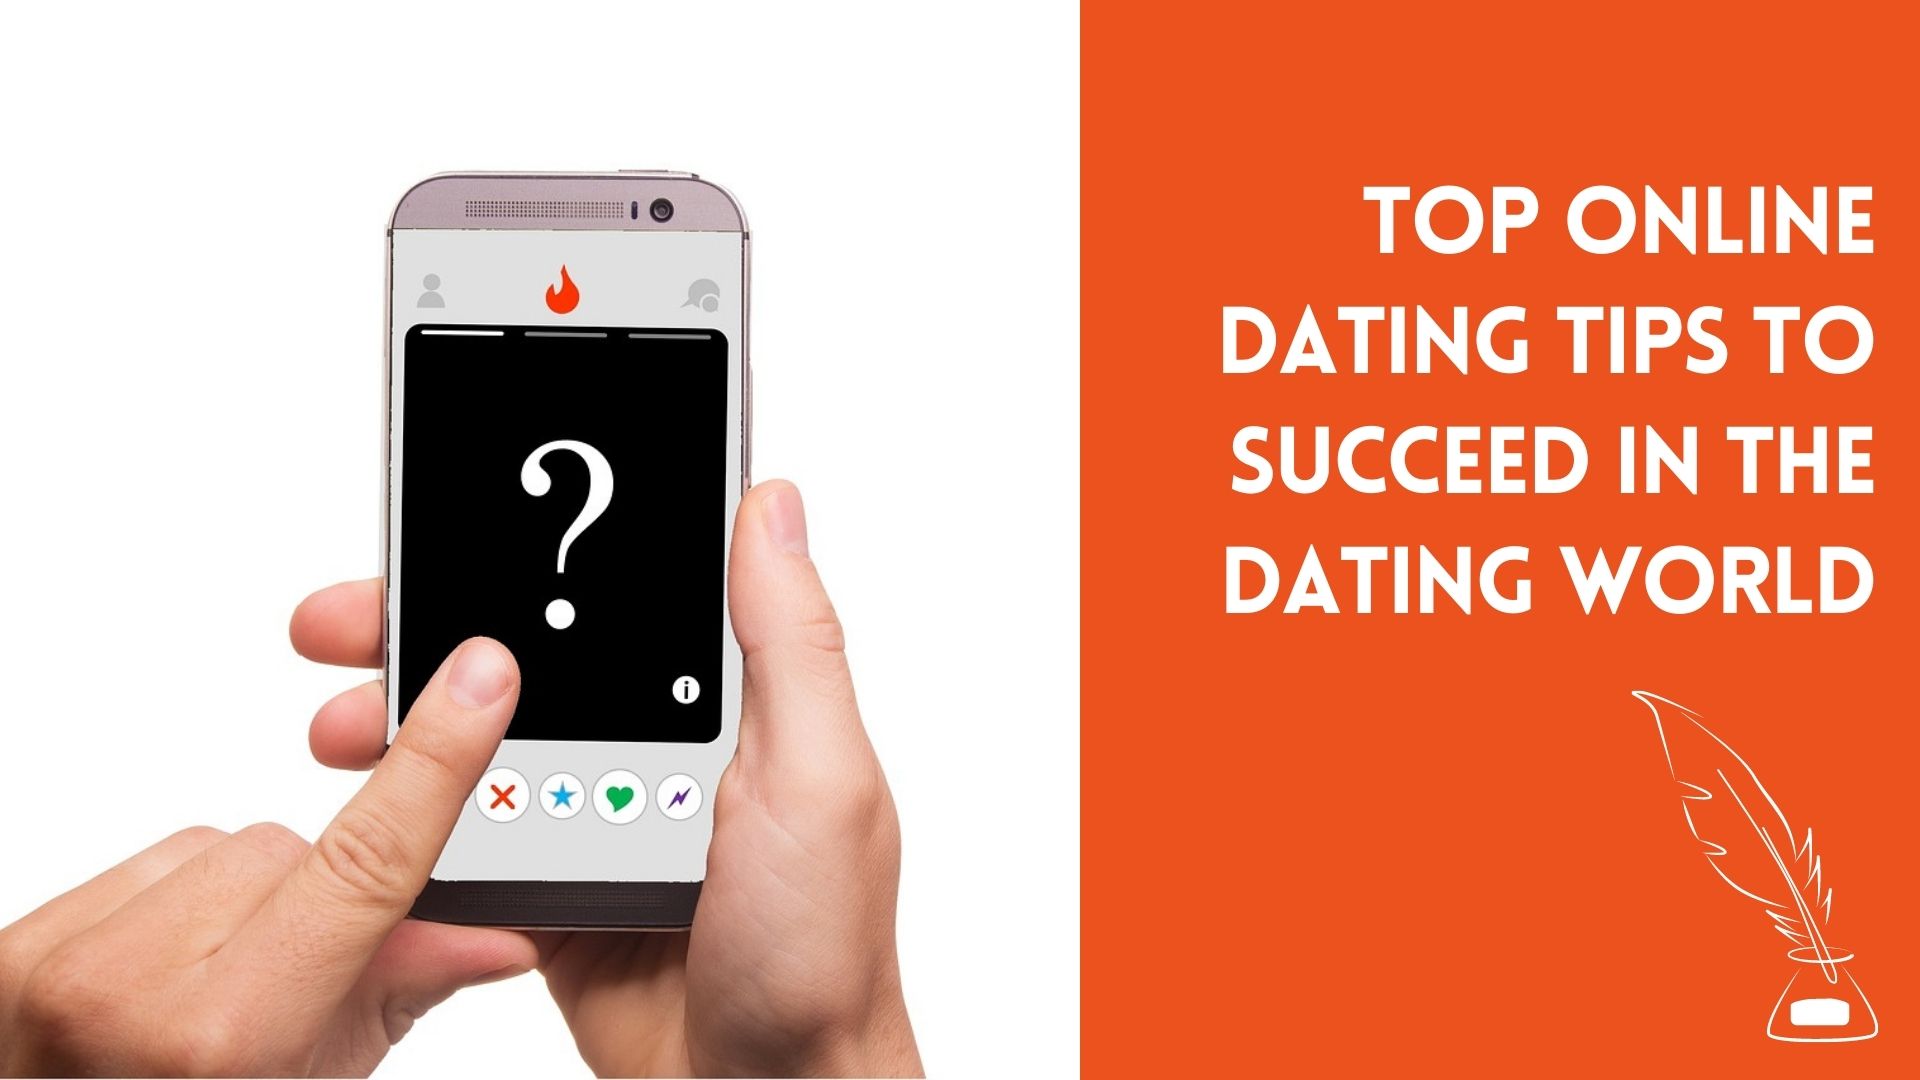 Top Online Dating Tips to Succeed in the Dating World